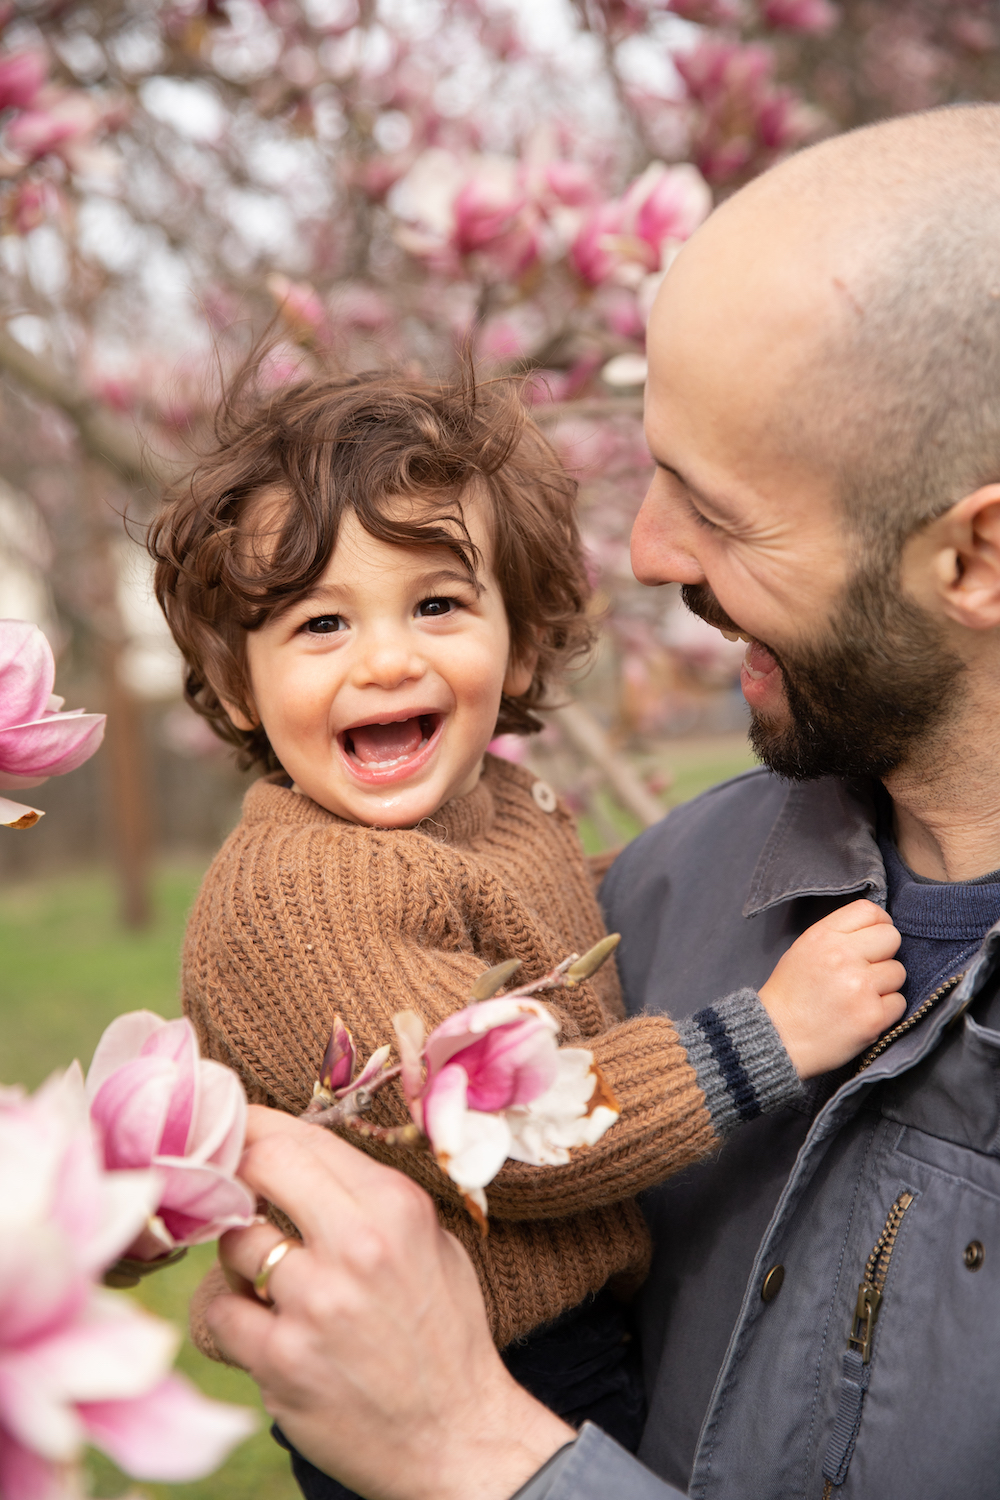 A father holding his son with a flower in his hand.